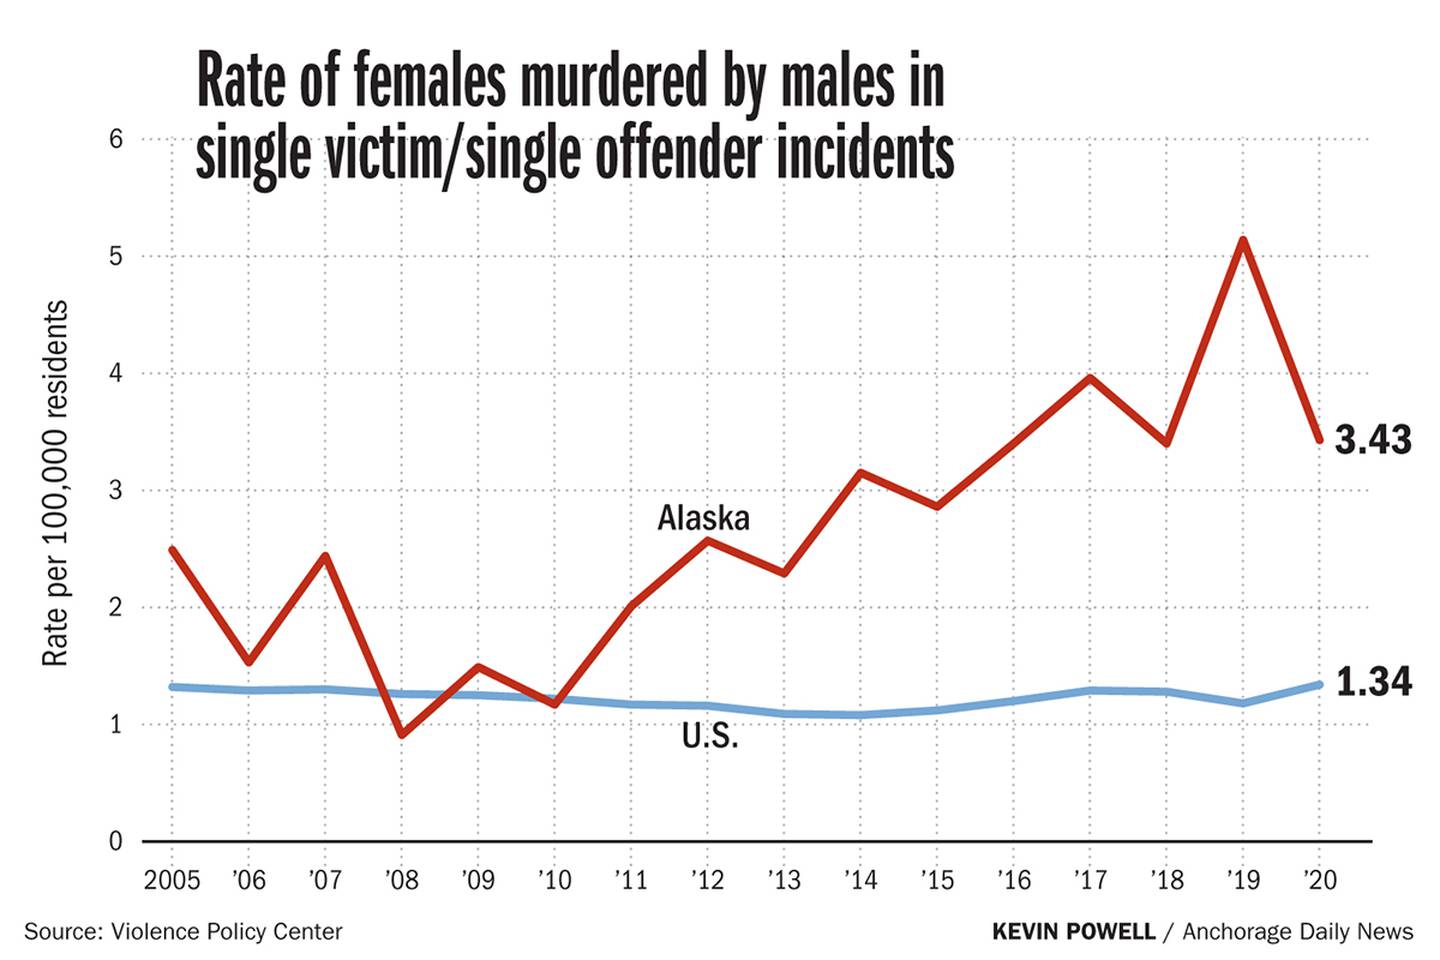 Rate of females murdered by males in single victim/single offender incidents